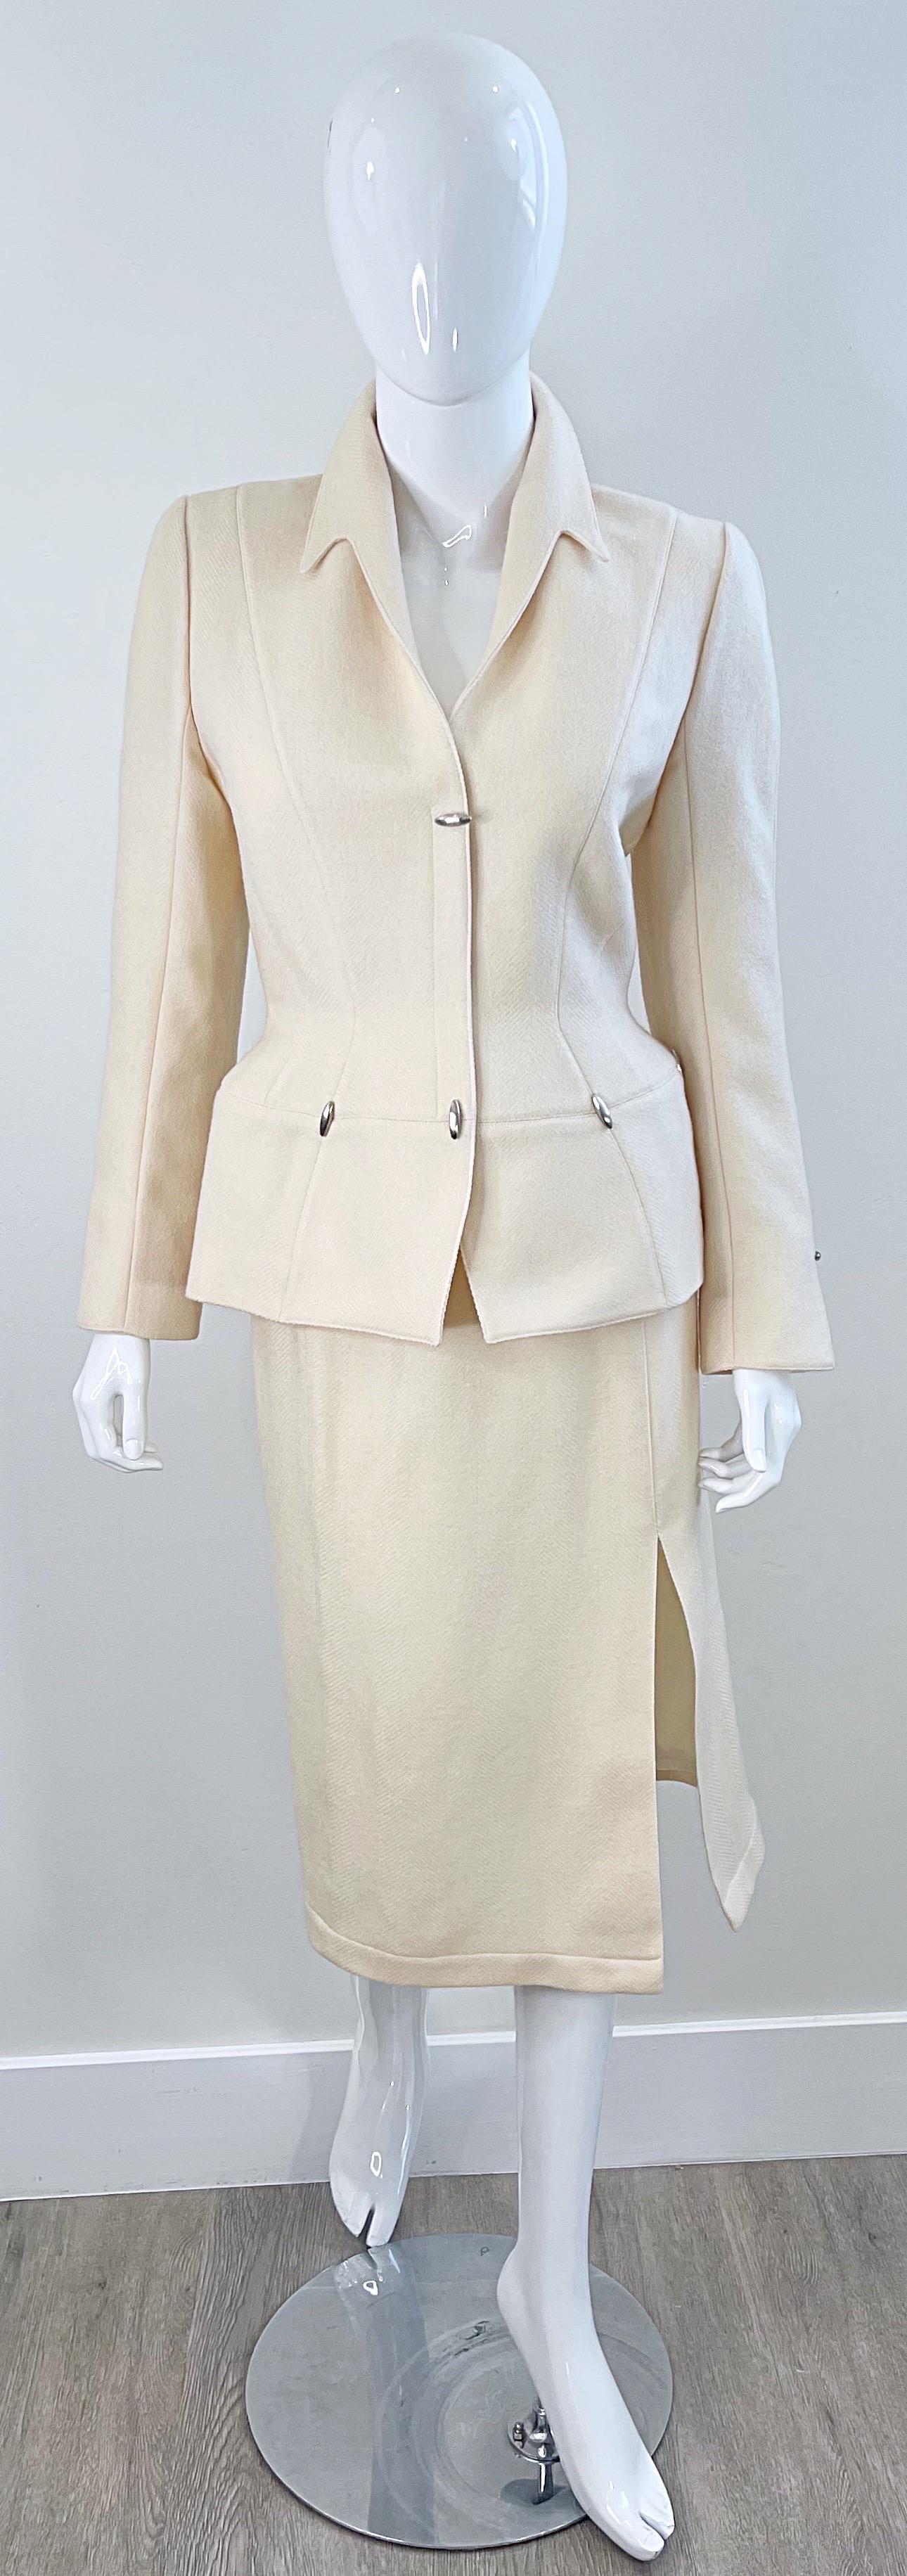 Avant Garde THIERRY MUGLER Fall / Winter 1989 ivory winter white wool skirt suit ! Features silver bullets around the waist of the jacket, and at center bust. Hidden snaps up the front. High waisted pencil skirt has hidden zipper up the back with